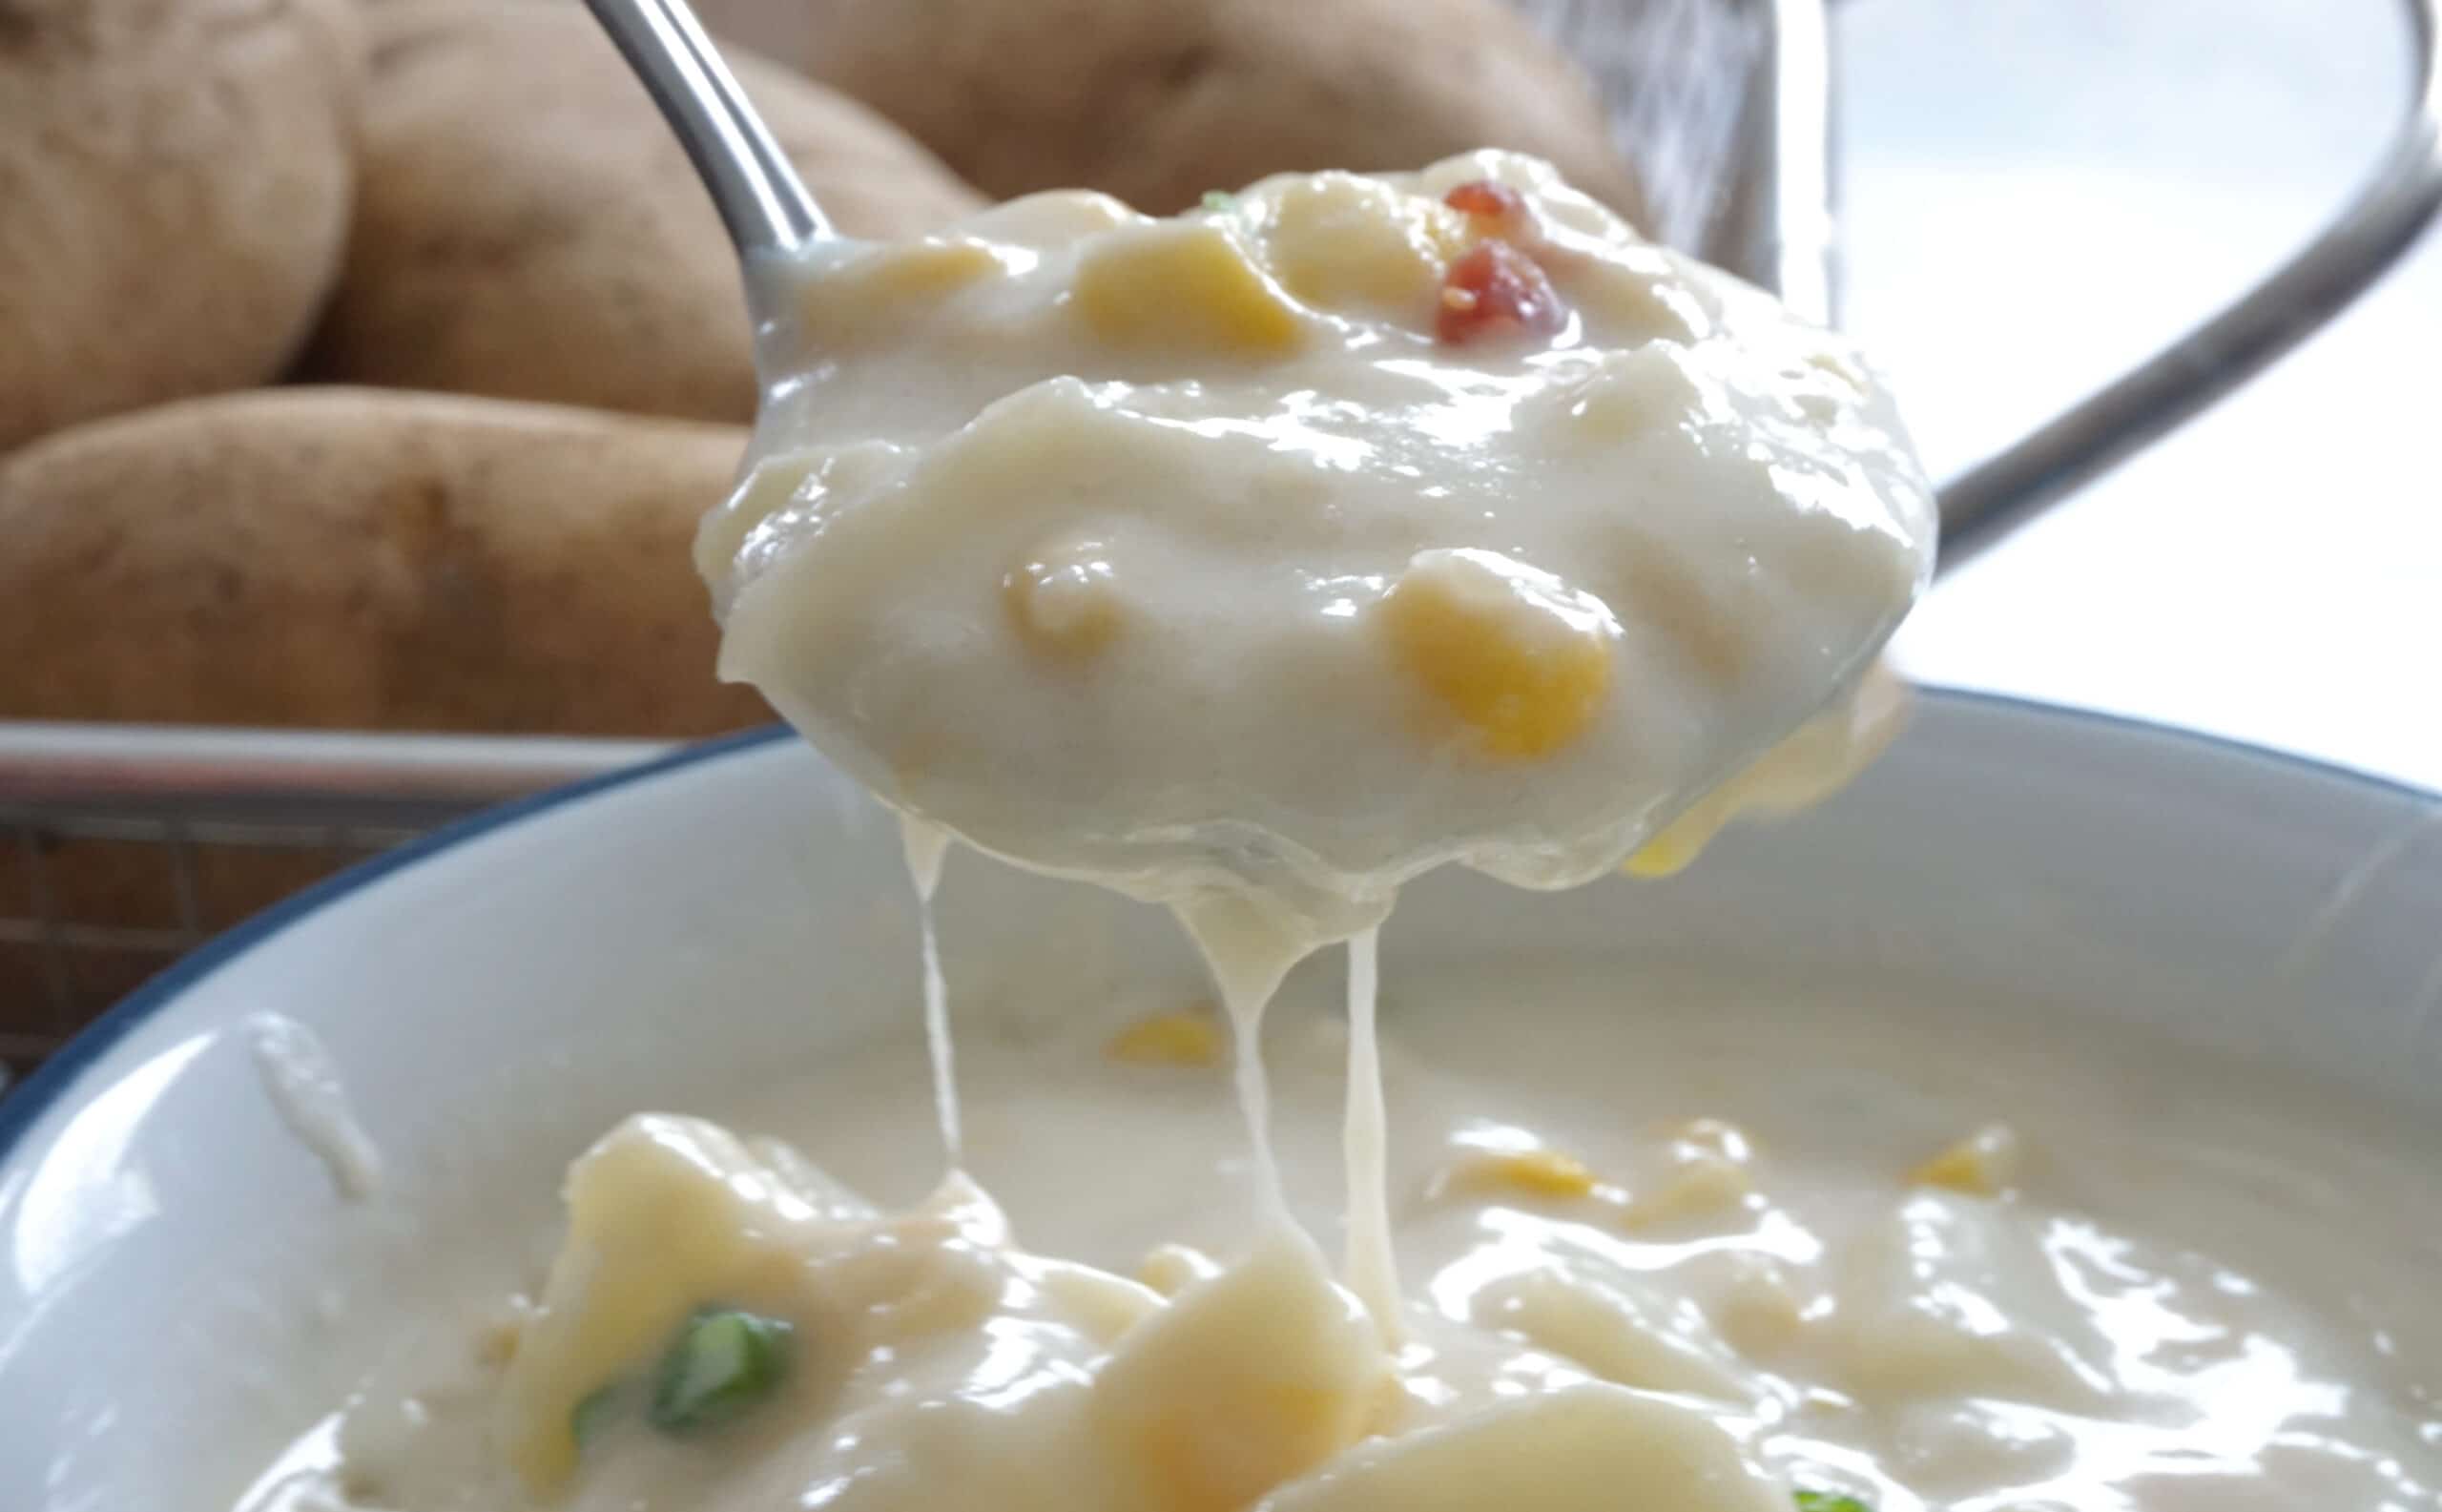 potato soup dripping with cheese from a spoon